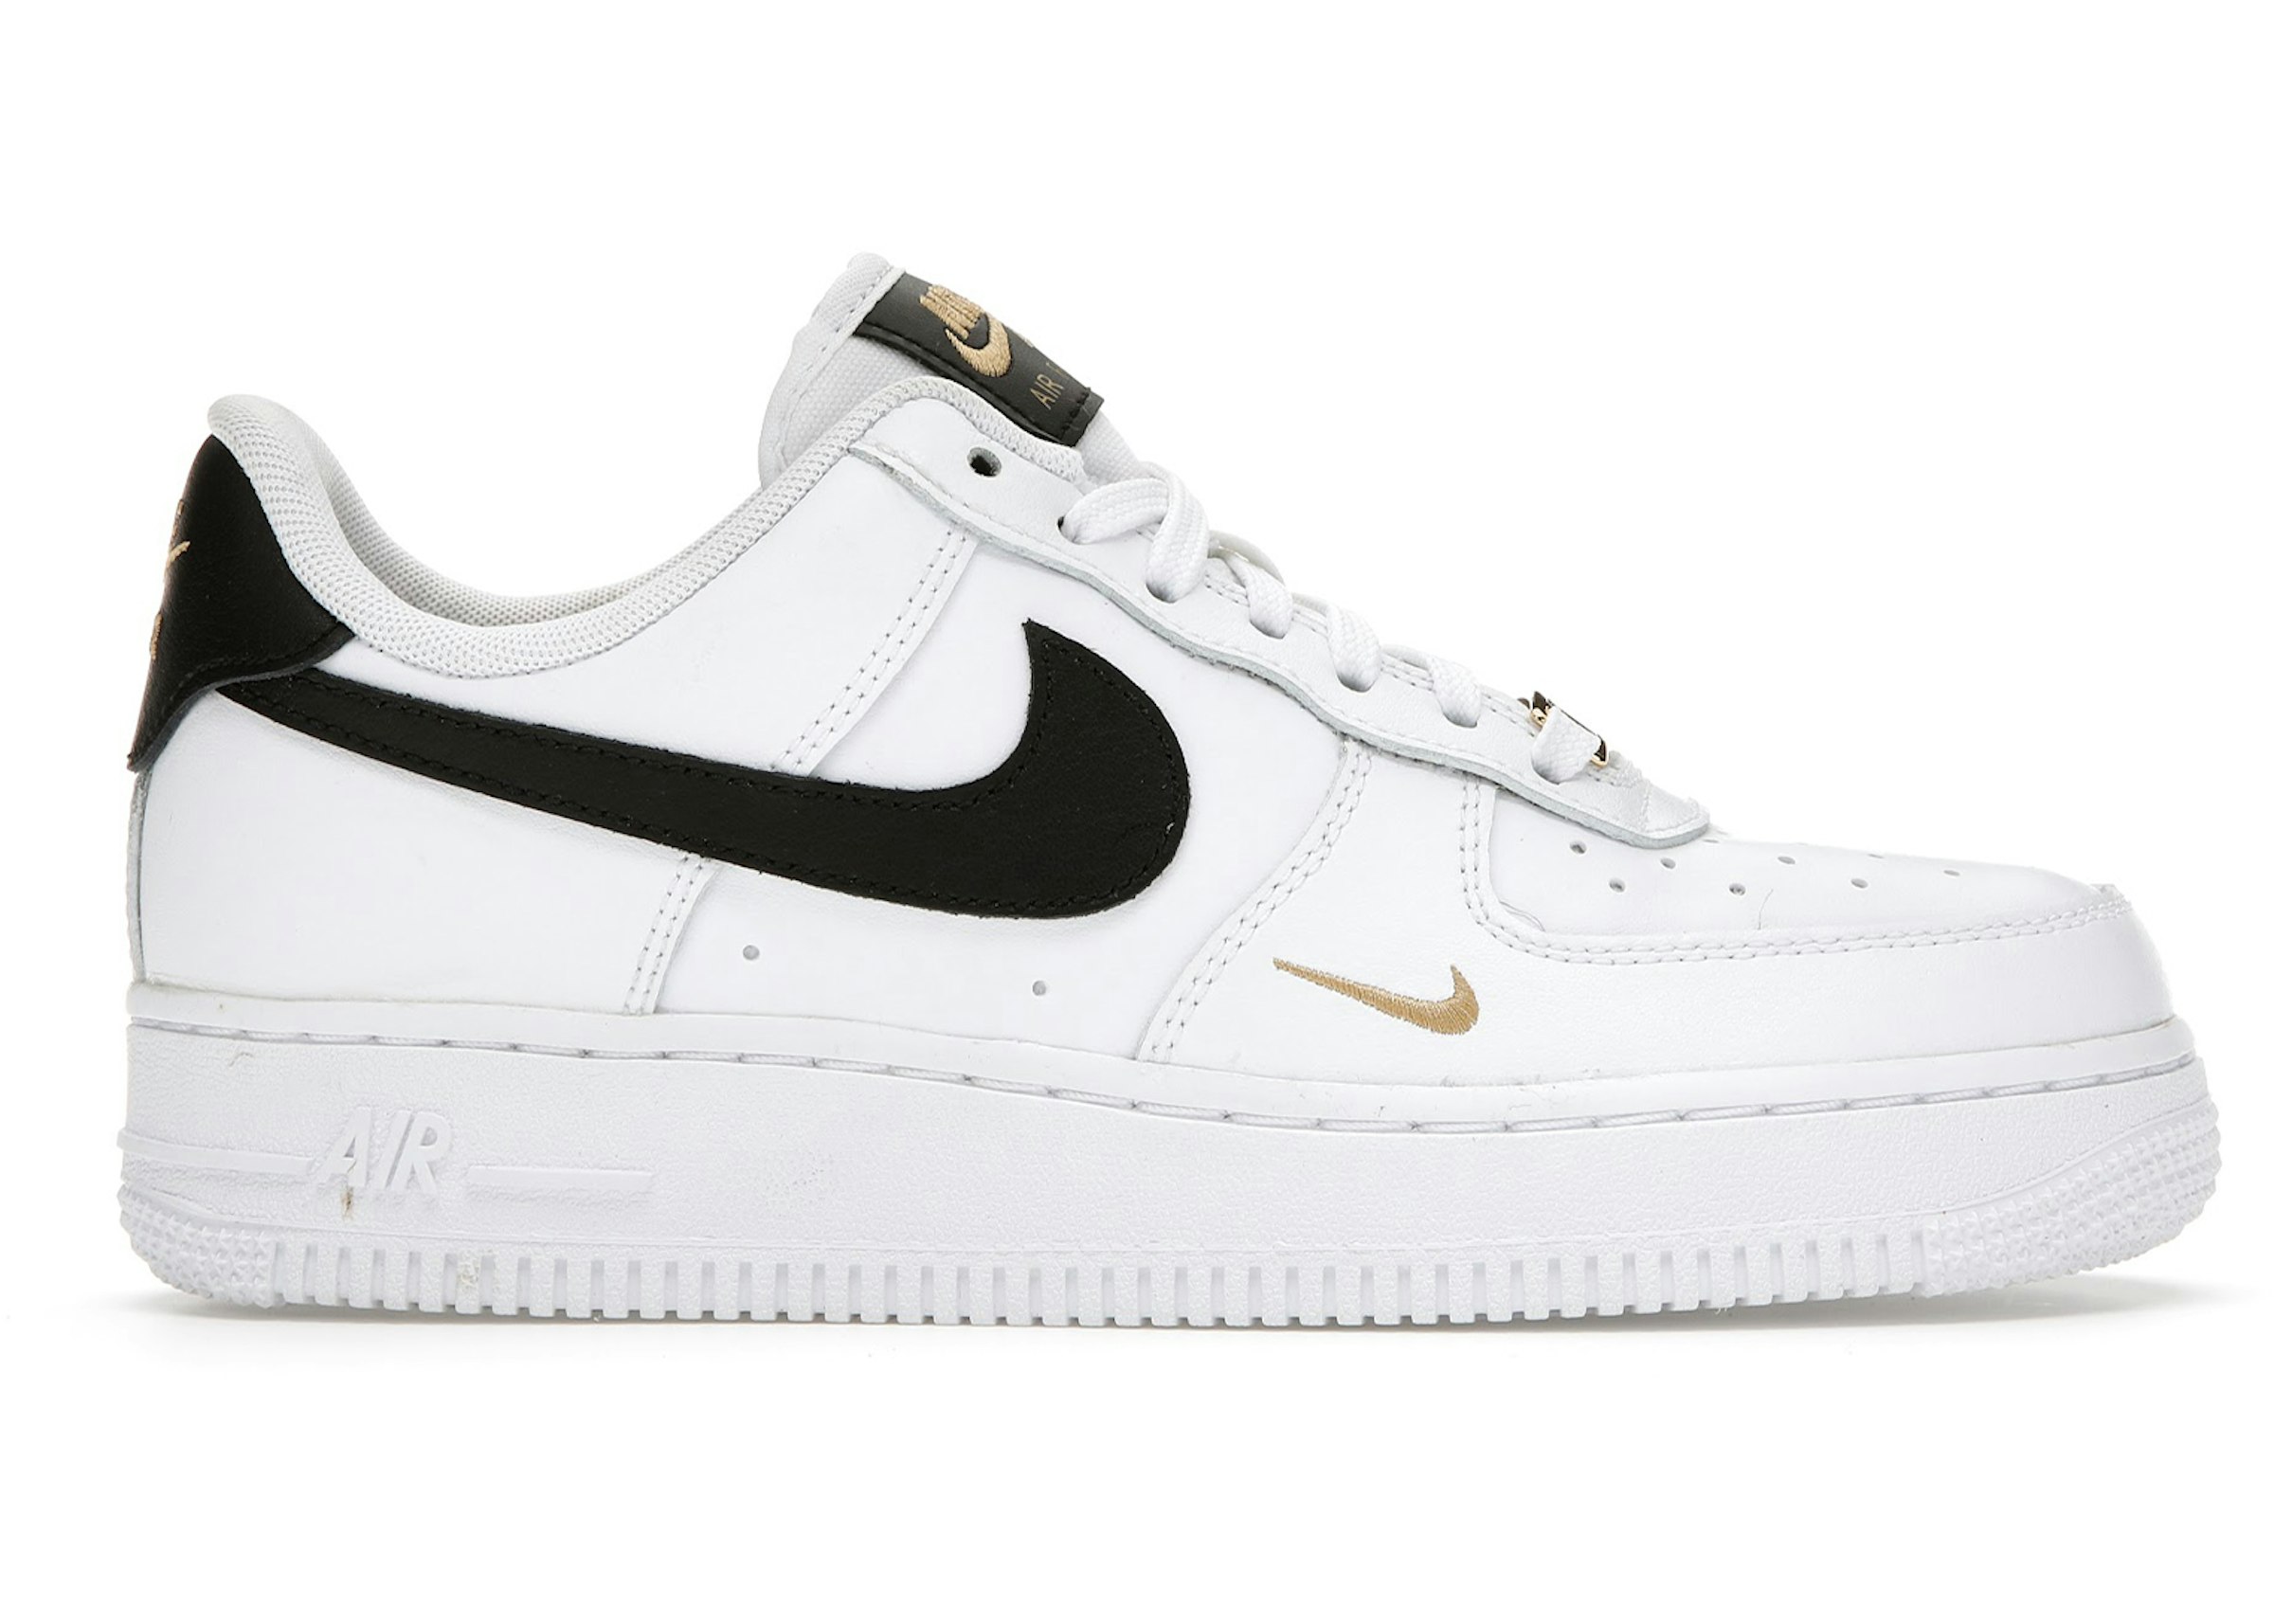 Nike Air Force 1 Low Essential White Black Gold Mini (Women's) - - US